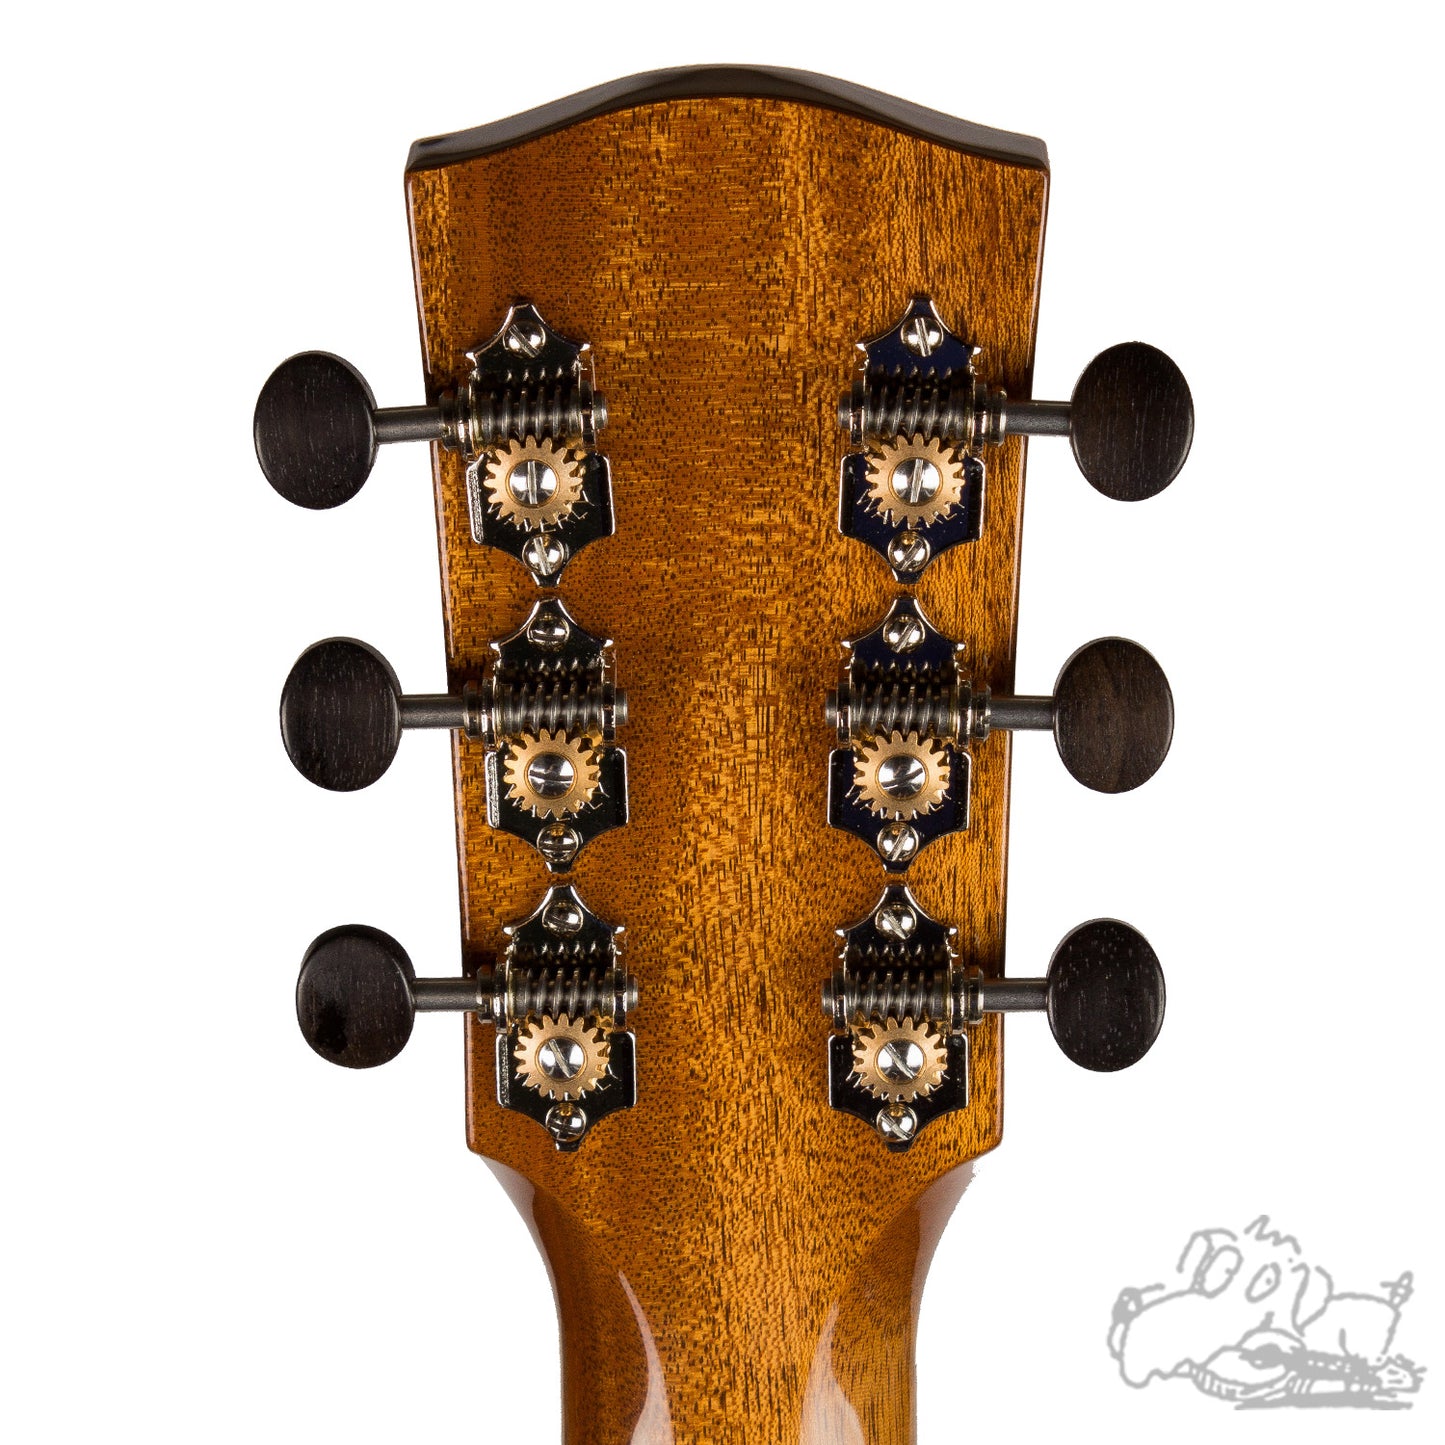 Bedell Limited Edition Serenade Orchestra Sitka/Unique Brazilian Rosewood